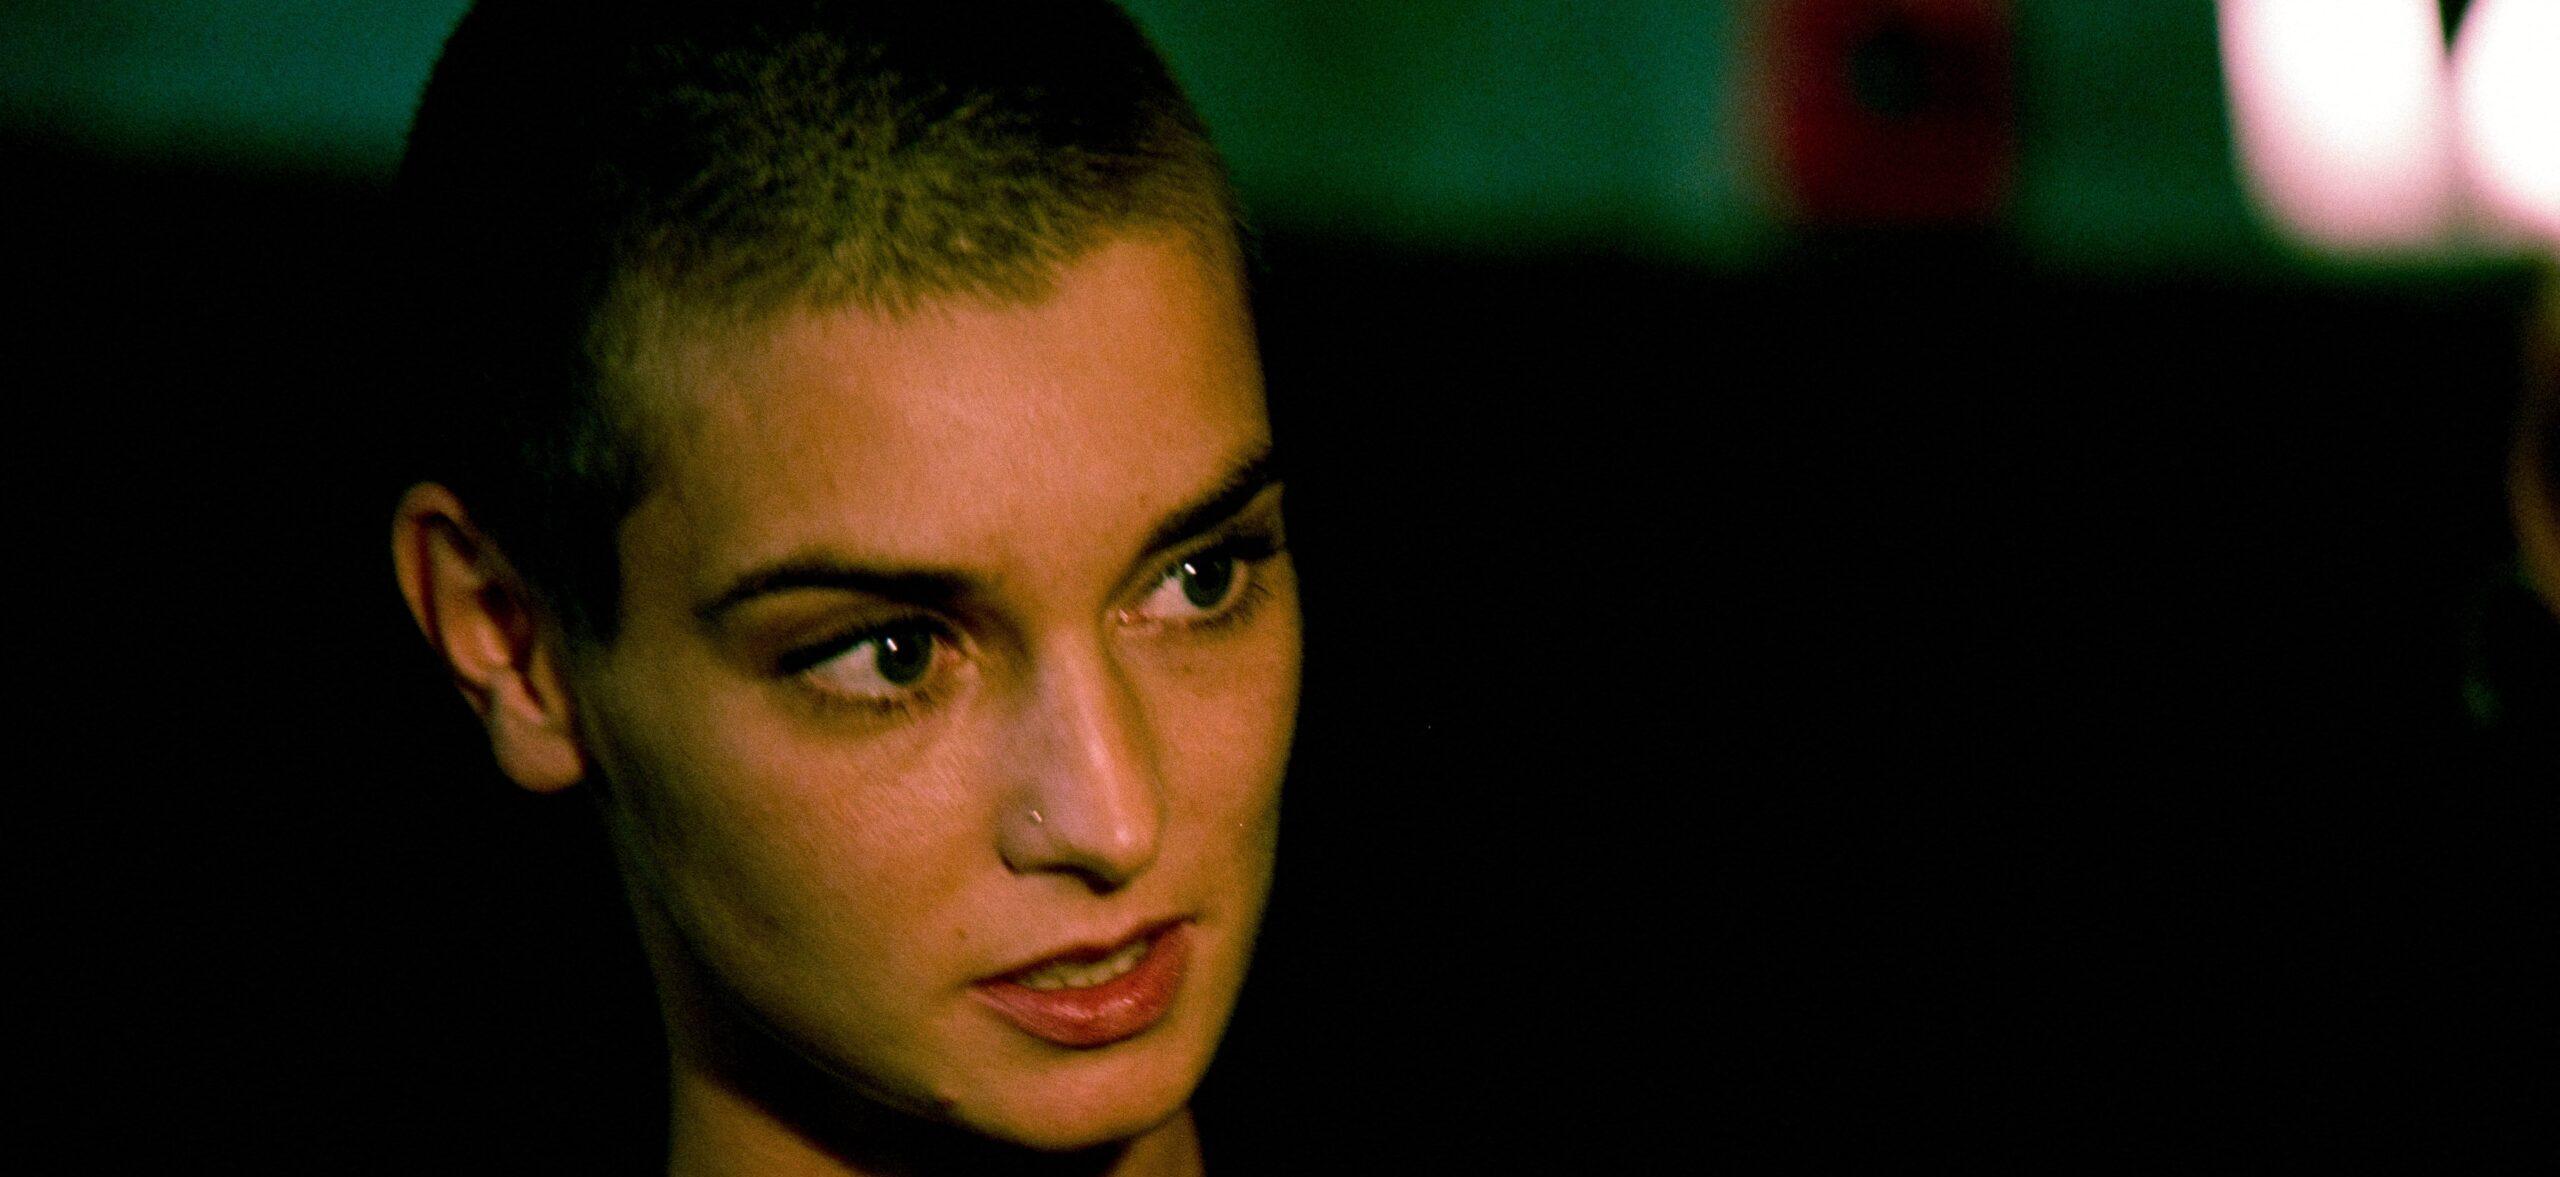 Sinéad O’Connor Was Found ‘Unresponsive’ At Her South London Home